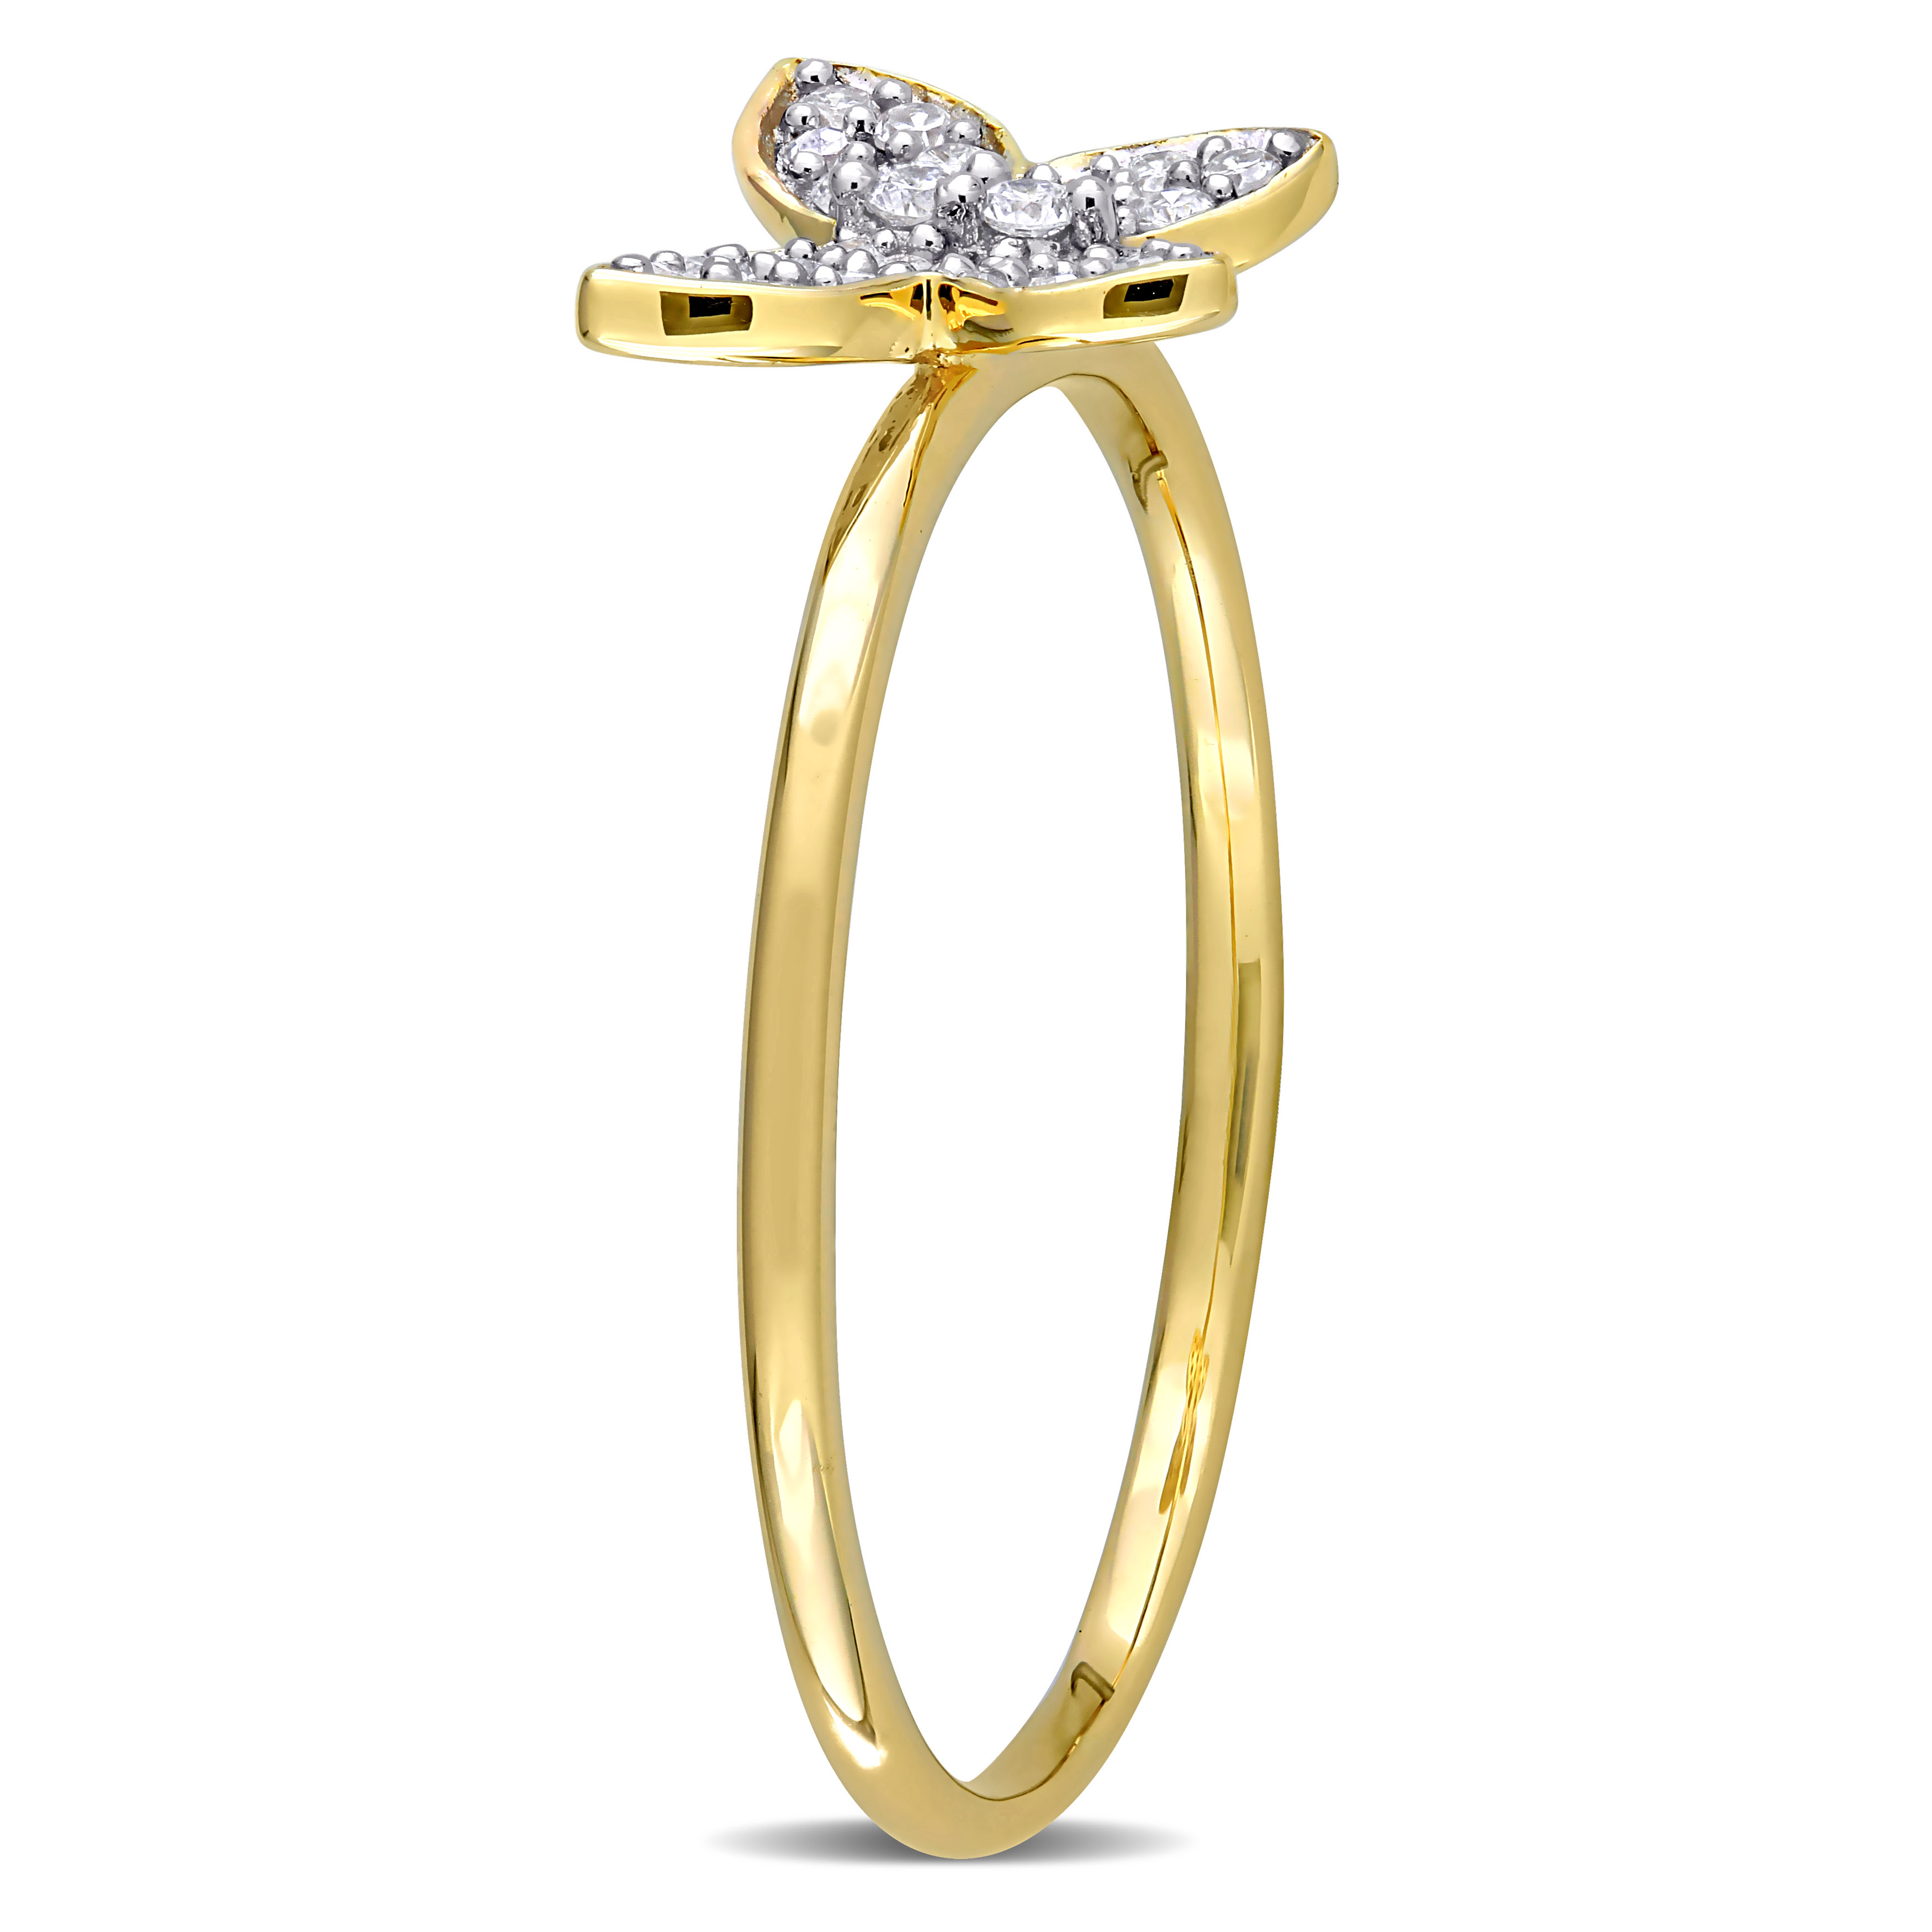 1/8 CT TW Diamond Butterfly Ring in 10k Yellow Gold